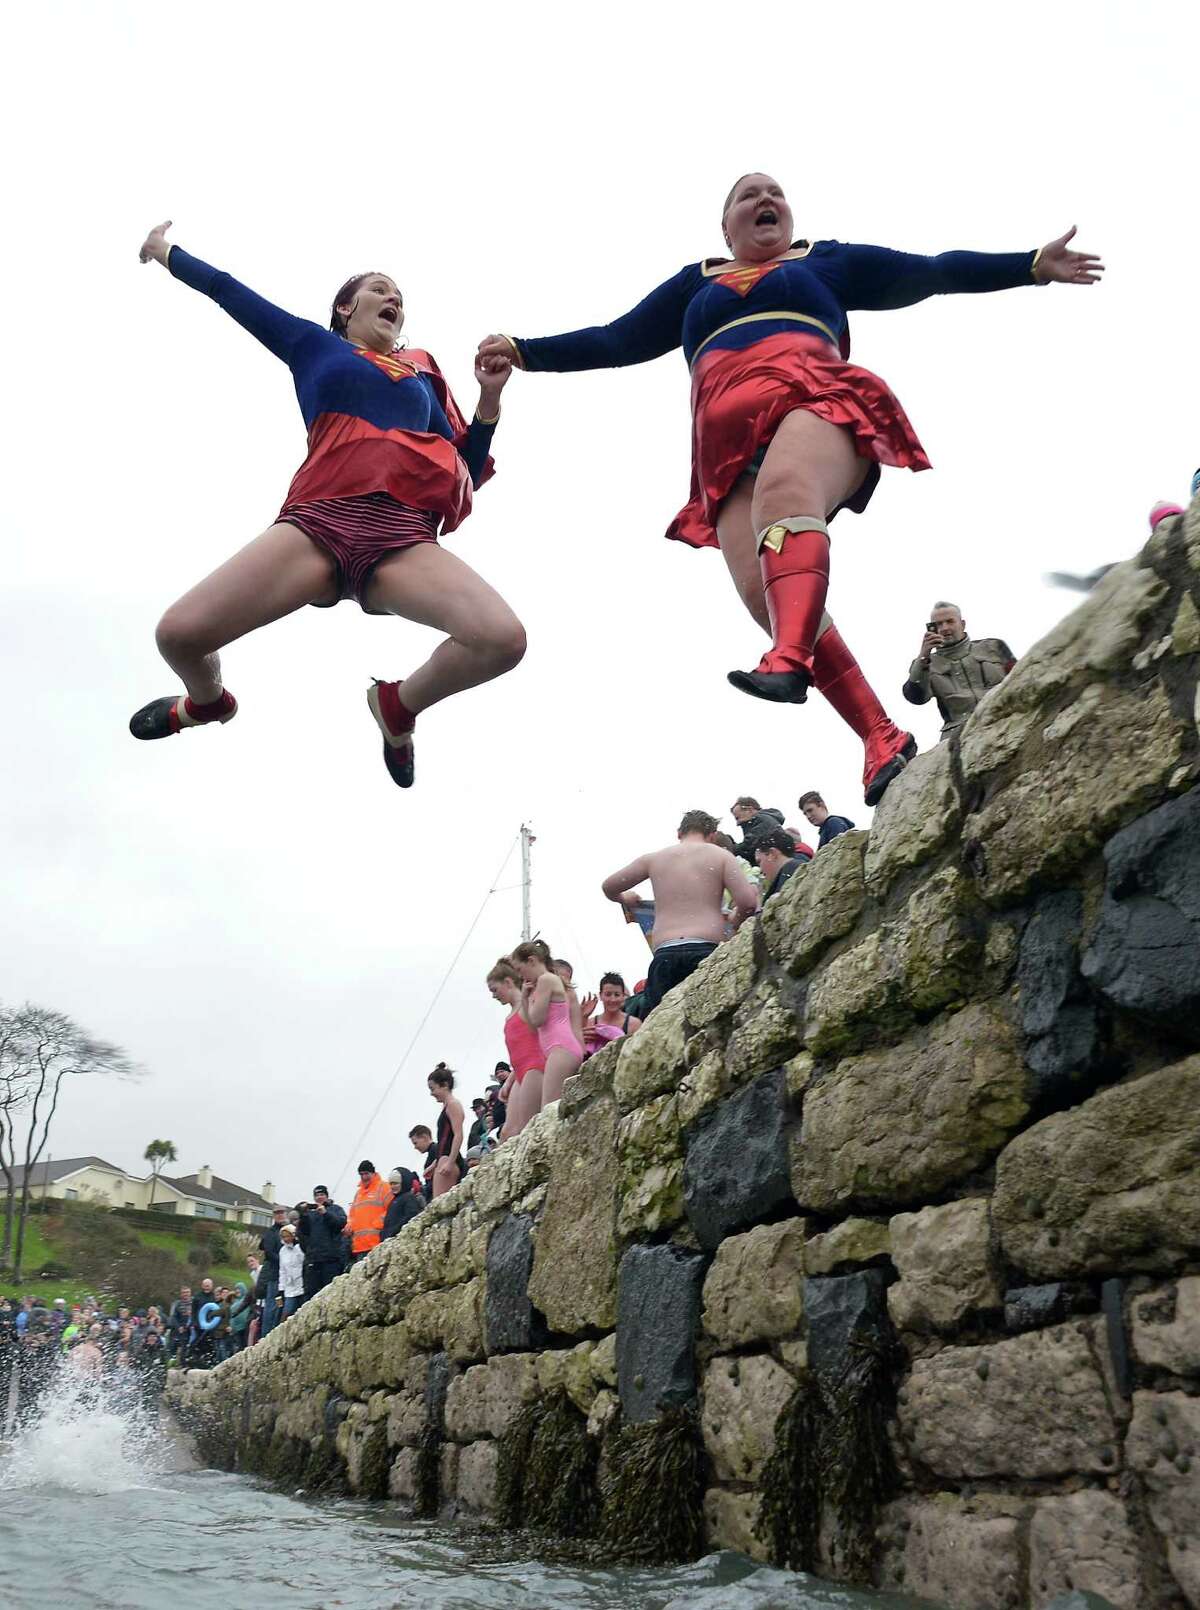  More super heroes take the plunge during the New Year's Day swim at Carnlough harbour in Carnlough, Northern Ireland. 